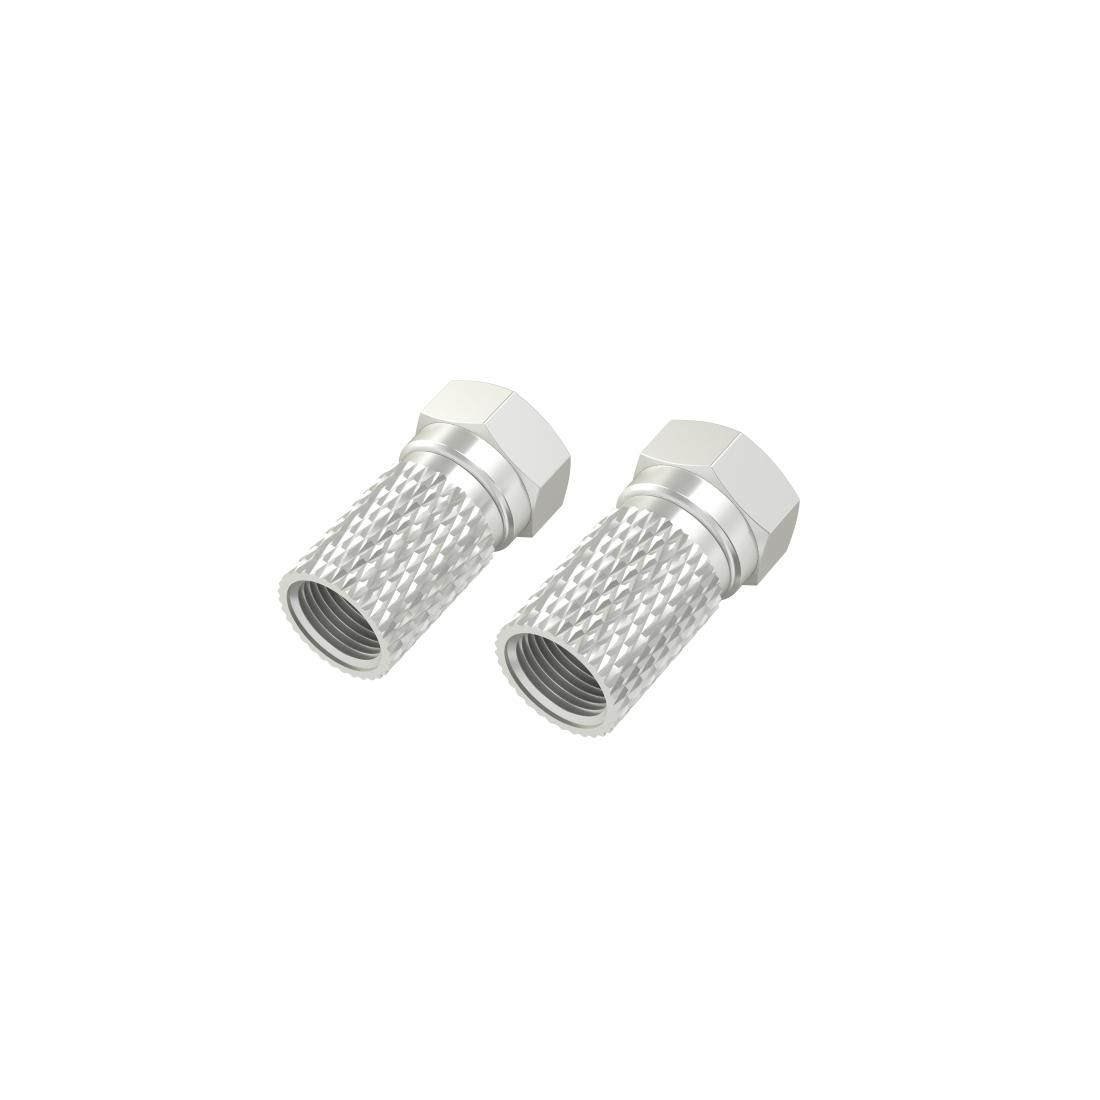 Hama 205206 W128824548 6 Coaxial Connector F-Type 2 